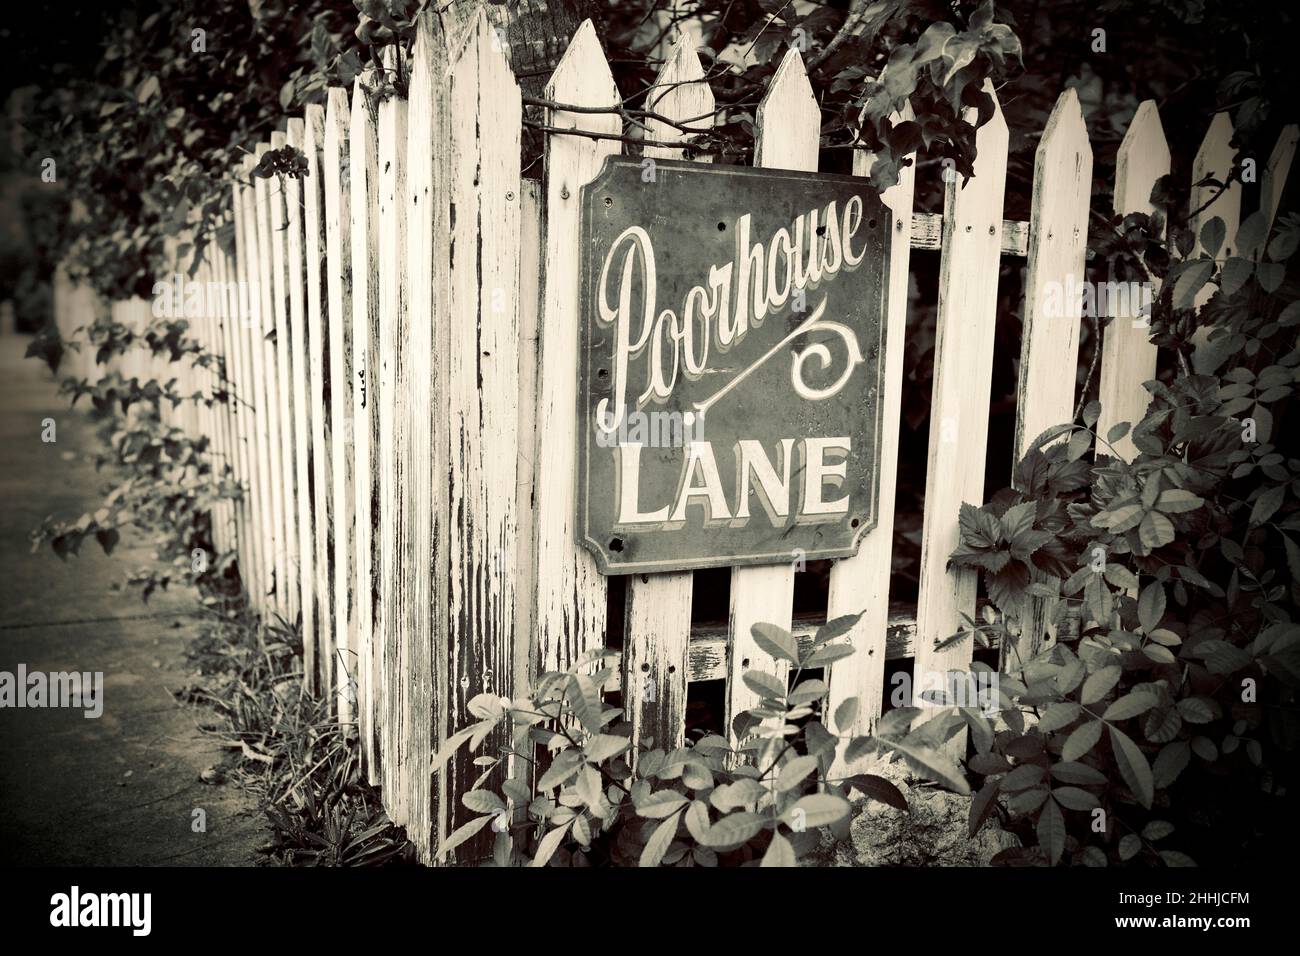 Poorhouse Lane sign on picket fence in Key West, Florida, FL USA. Island vacation destination. Stock Photo